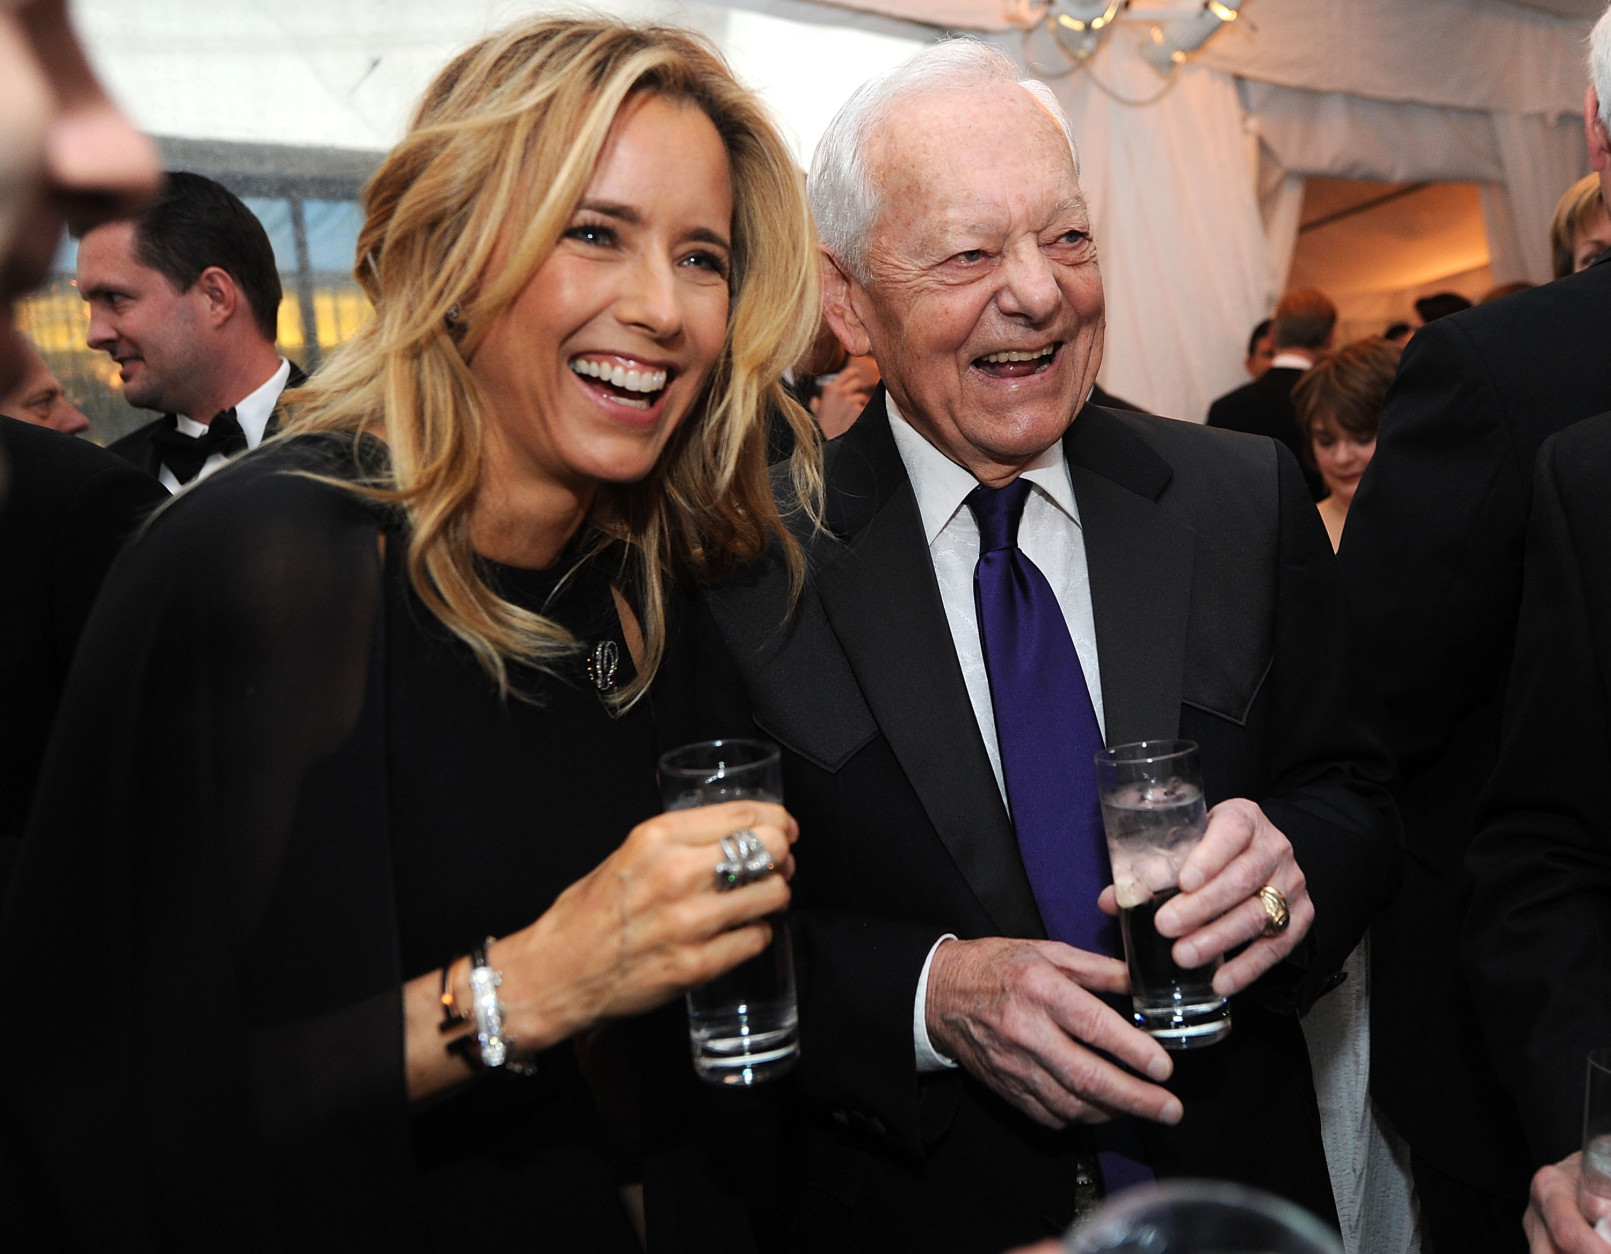 WASHINGTON, DC - APRIL 25: Actress Tea Leoni(L) and Bob Schieffer attend the National Journal and The Atlantic White House Correspondents' Pre-Dinner Reception at The Washington Hilton on April 25, 2015 in Washington, DC.  (Photo by Brad Barket/Getty Images)